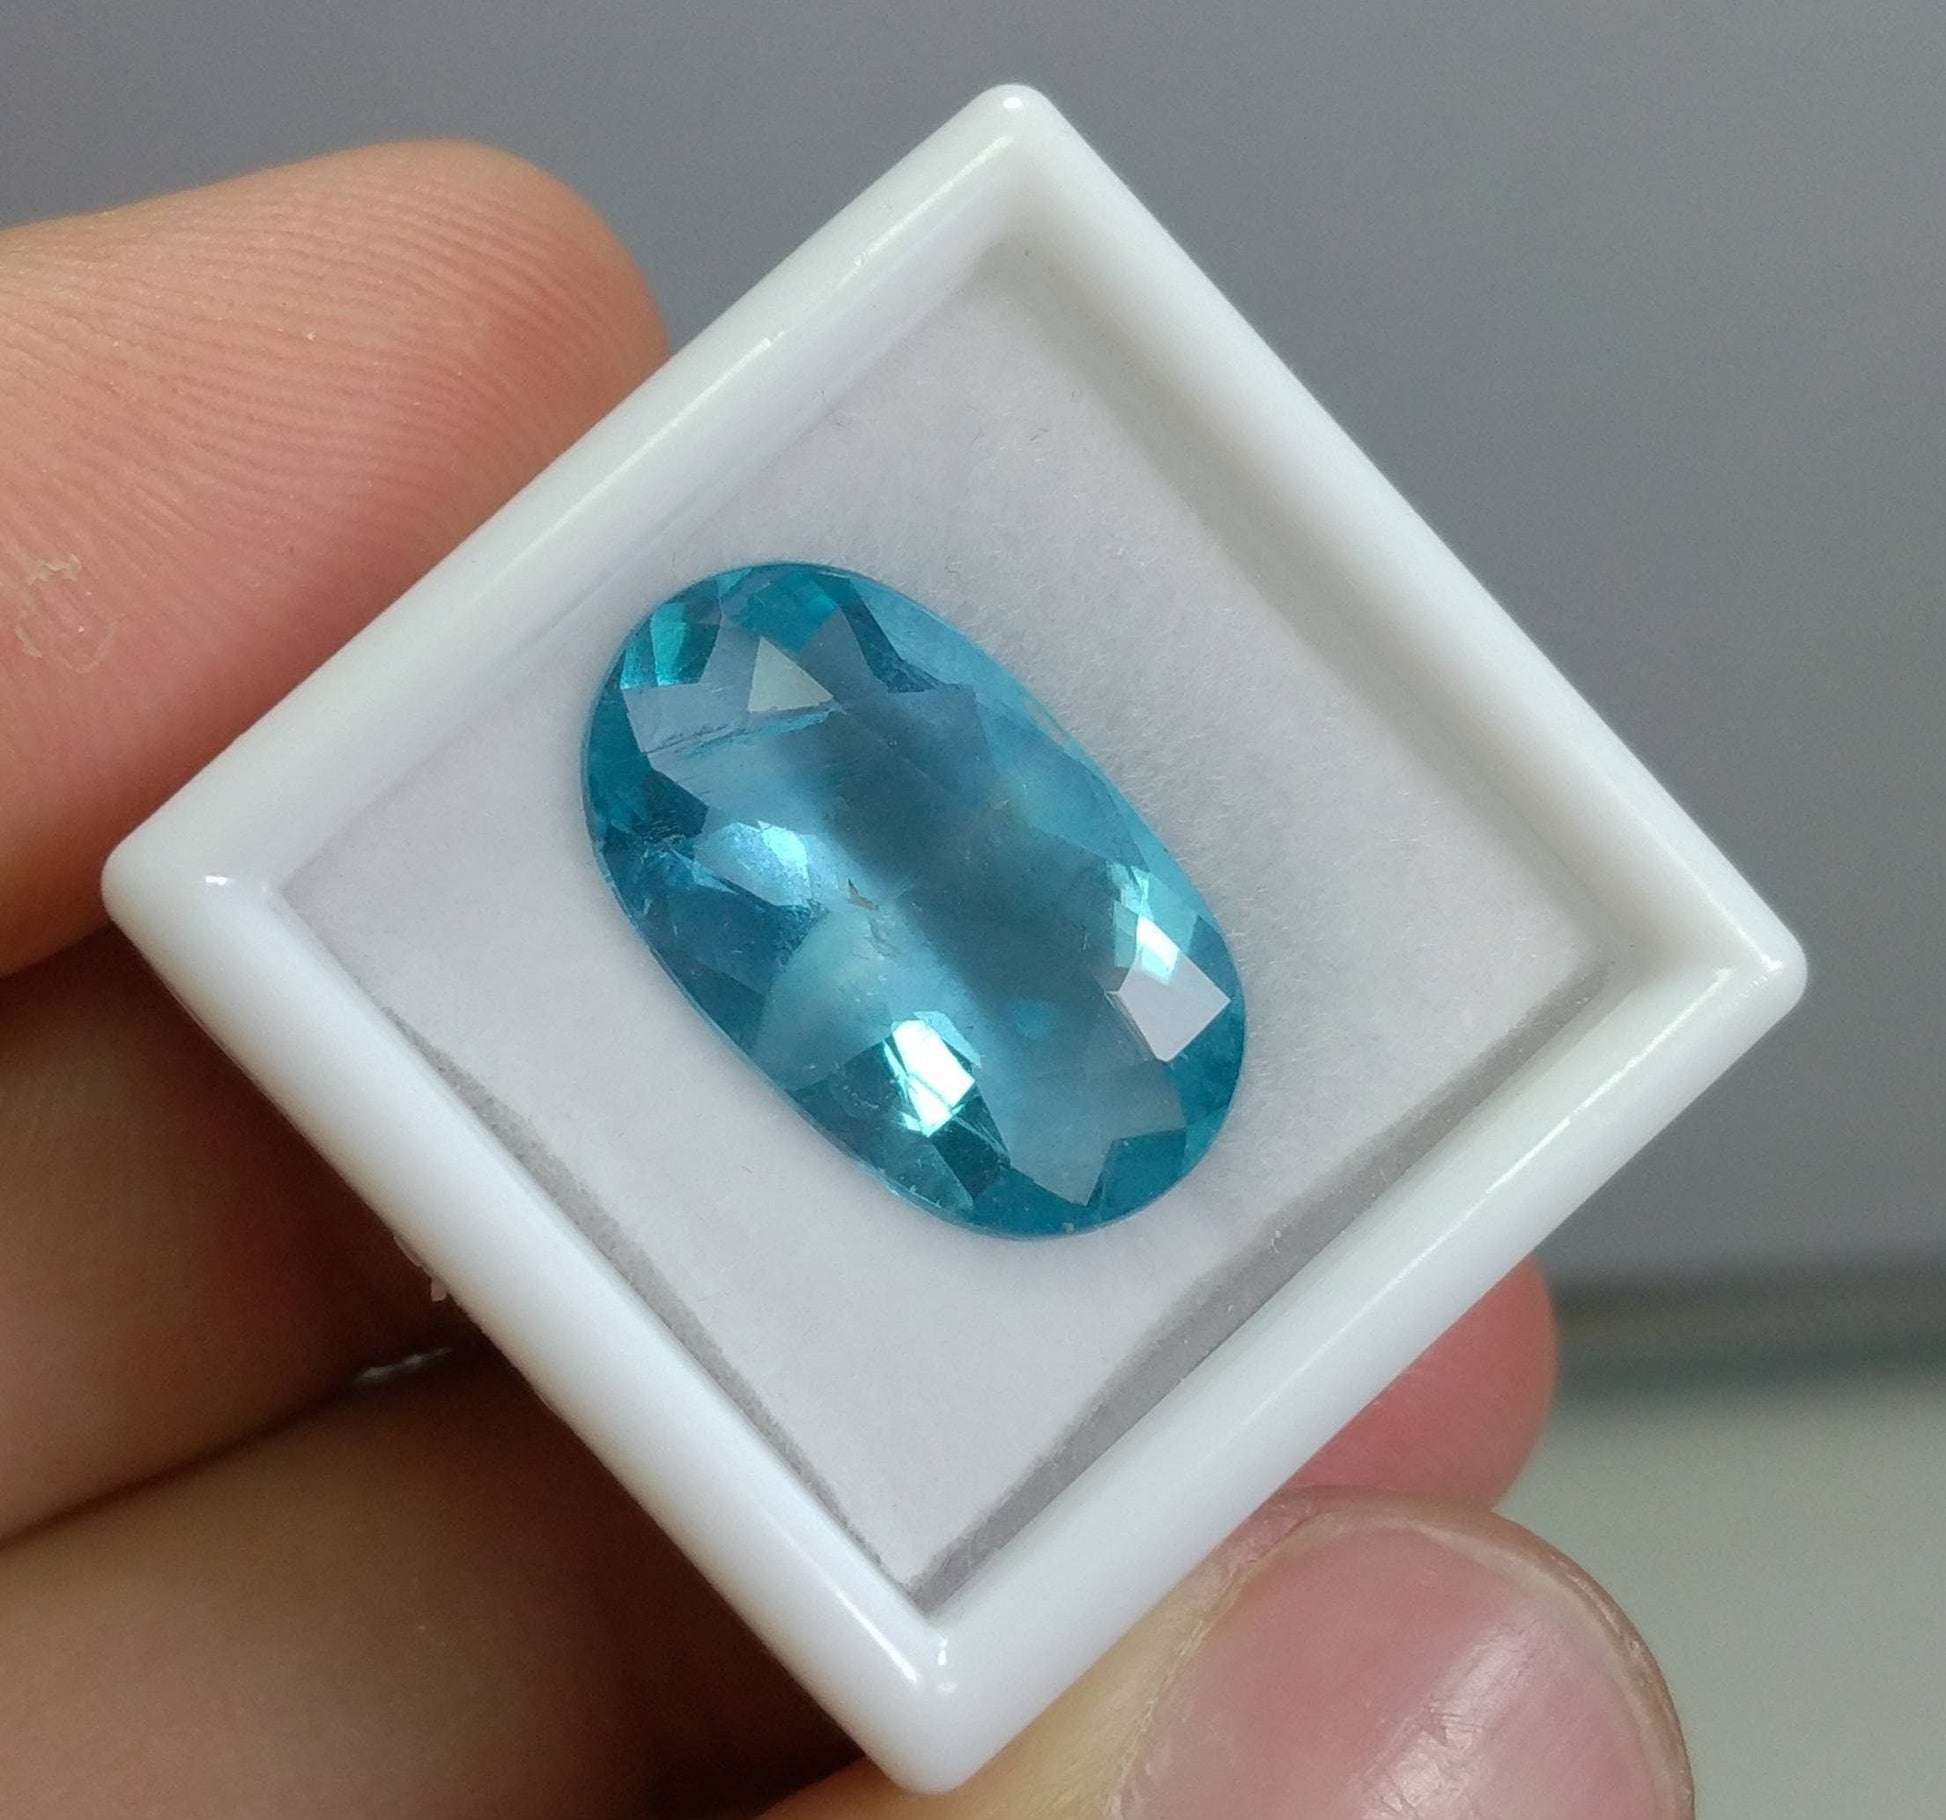 ARSAA GEMS AND MINERALSNatural fine quality beautiful 9.5 carats aesthetic deep blue faceted oval cut shape fluorite gem - Premium  from ARSAA GEMS AND MINERALS - Just $19.00! Shop now at ARSAA GEMS AND MINERALS